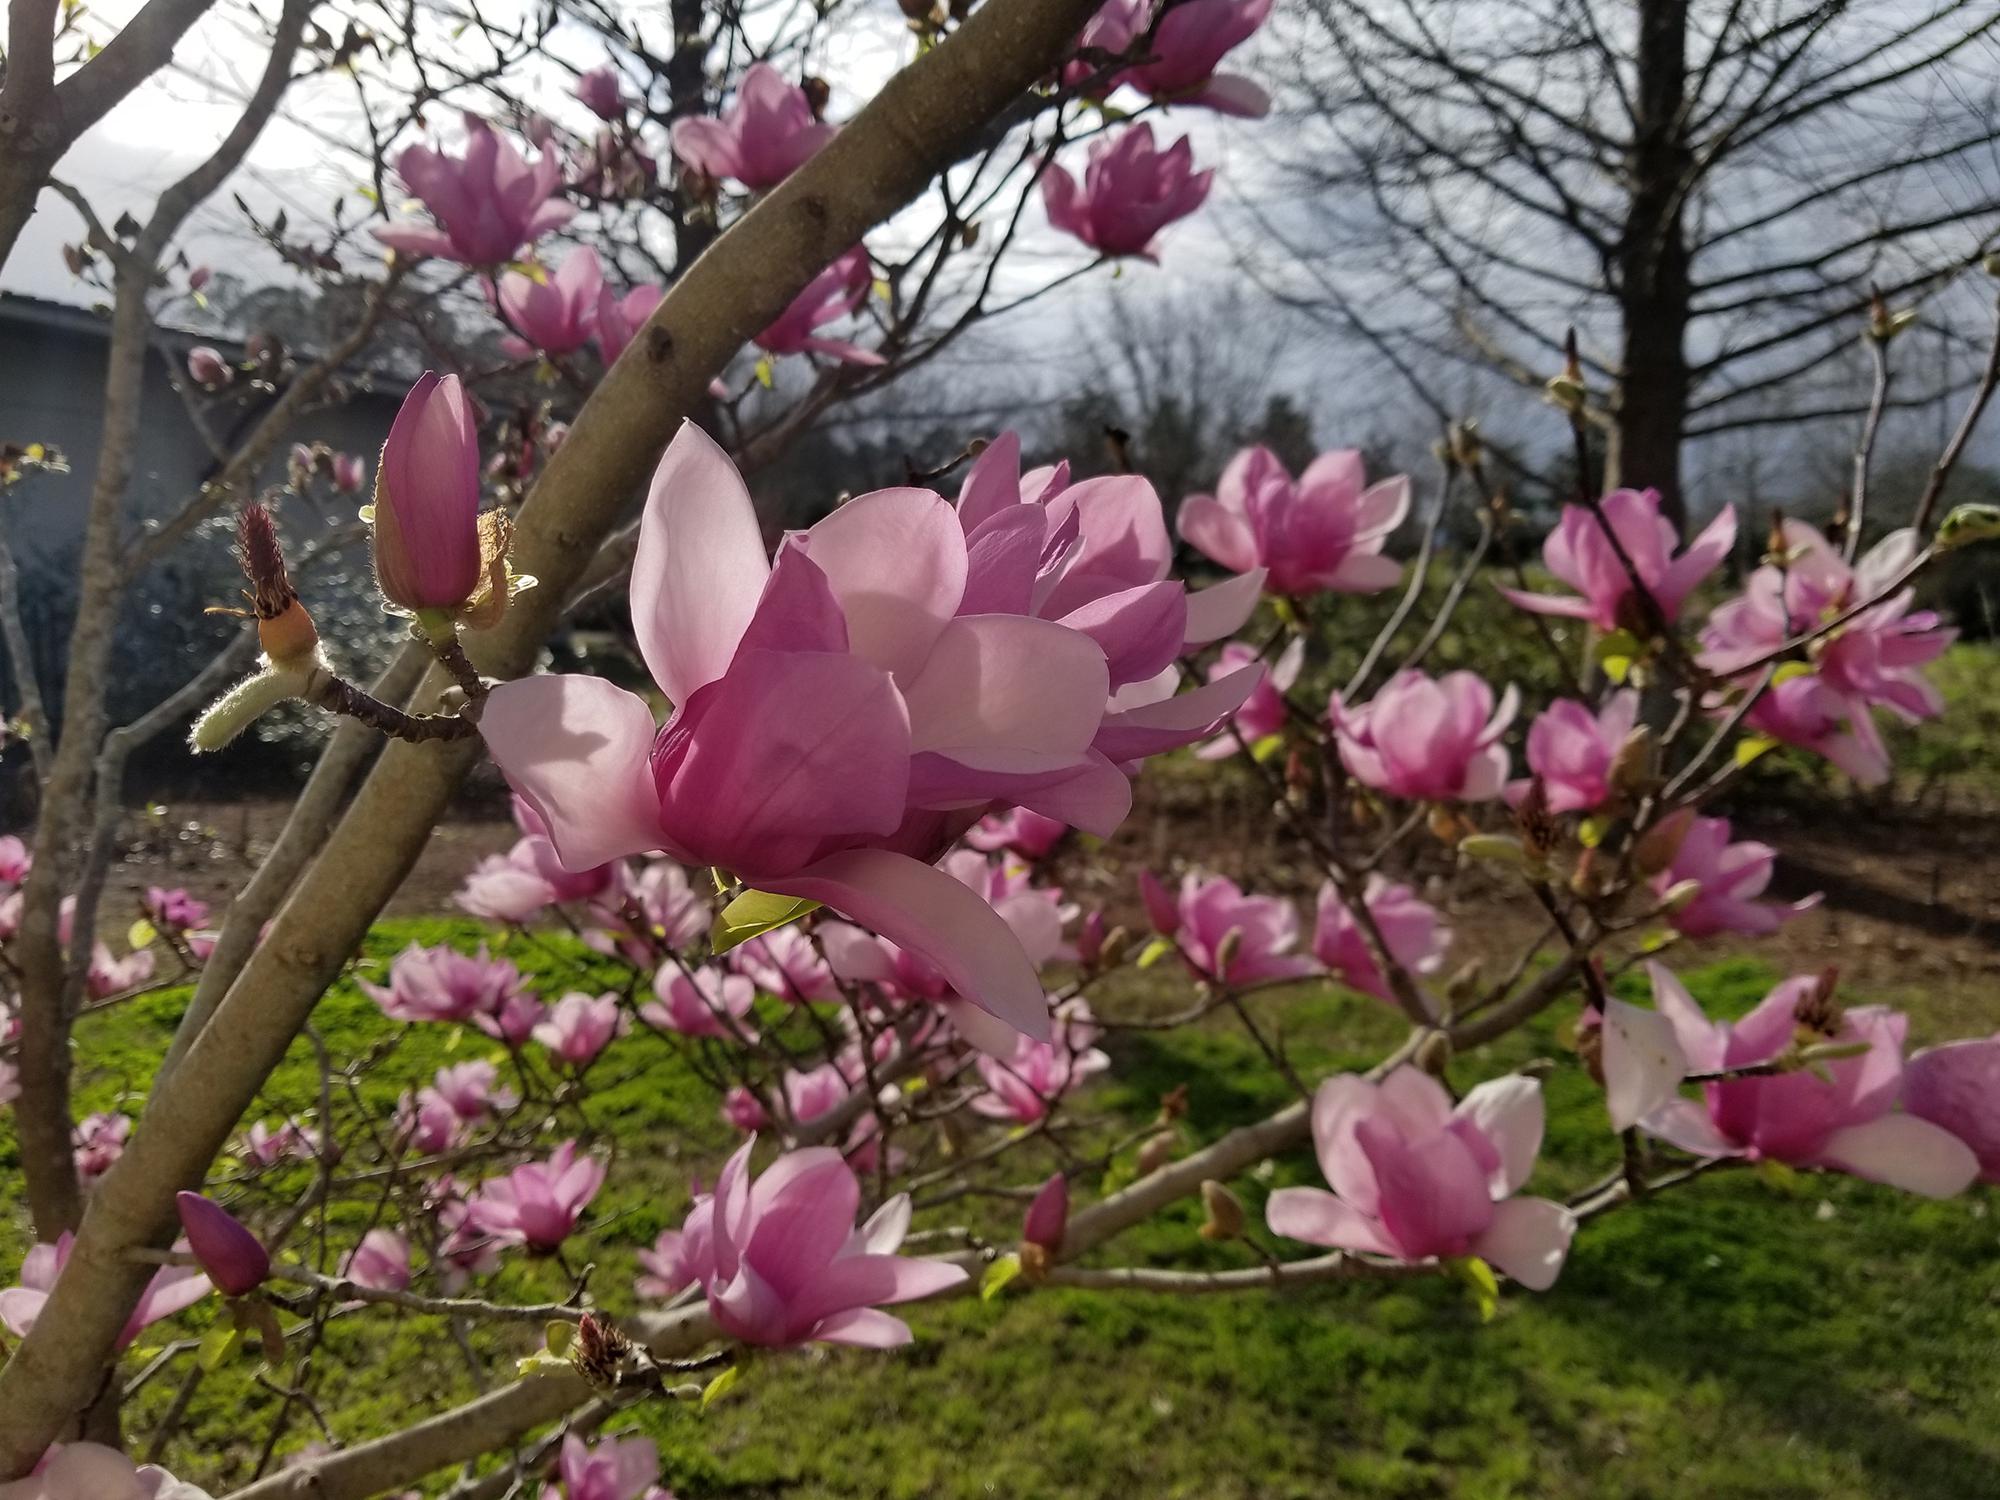 Saucer magnolias bloom before the leaves emerge, making their huge flowers the main attraction. (Photo by MSU Extension/Gary Bachman)